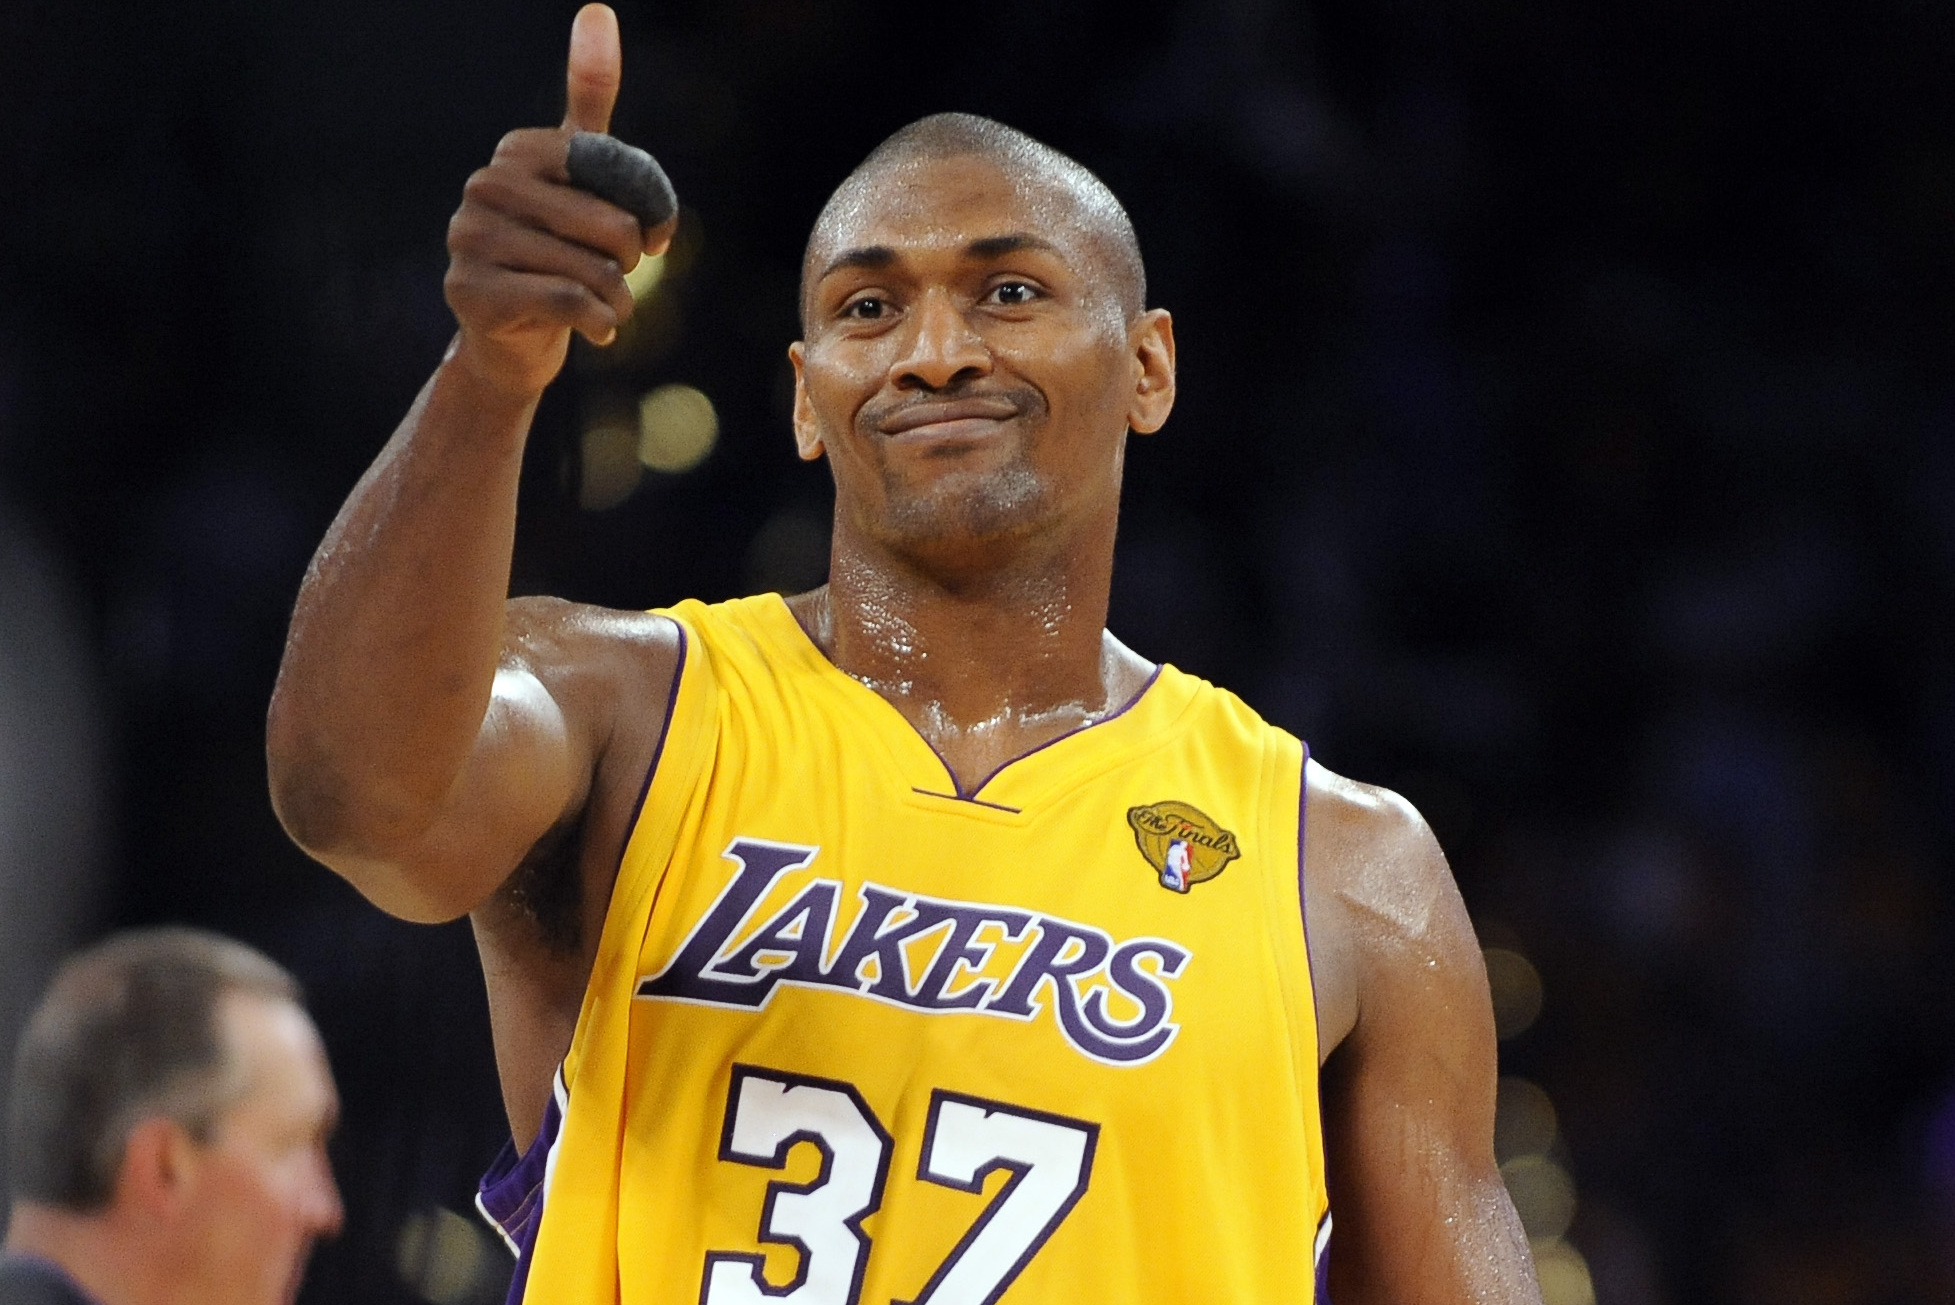 LA Lakers star Ron Artest officially becomes Metta World Peace as